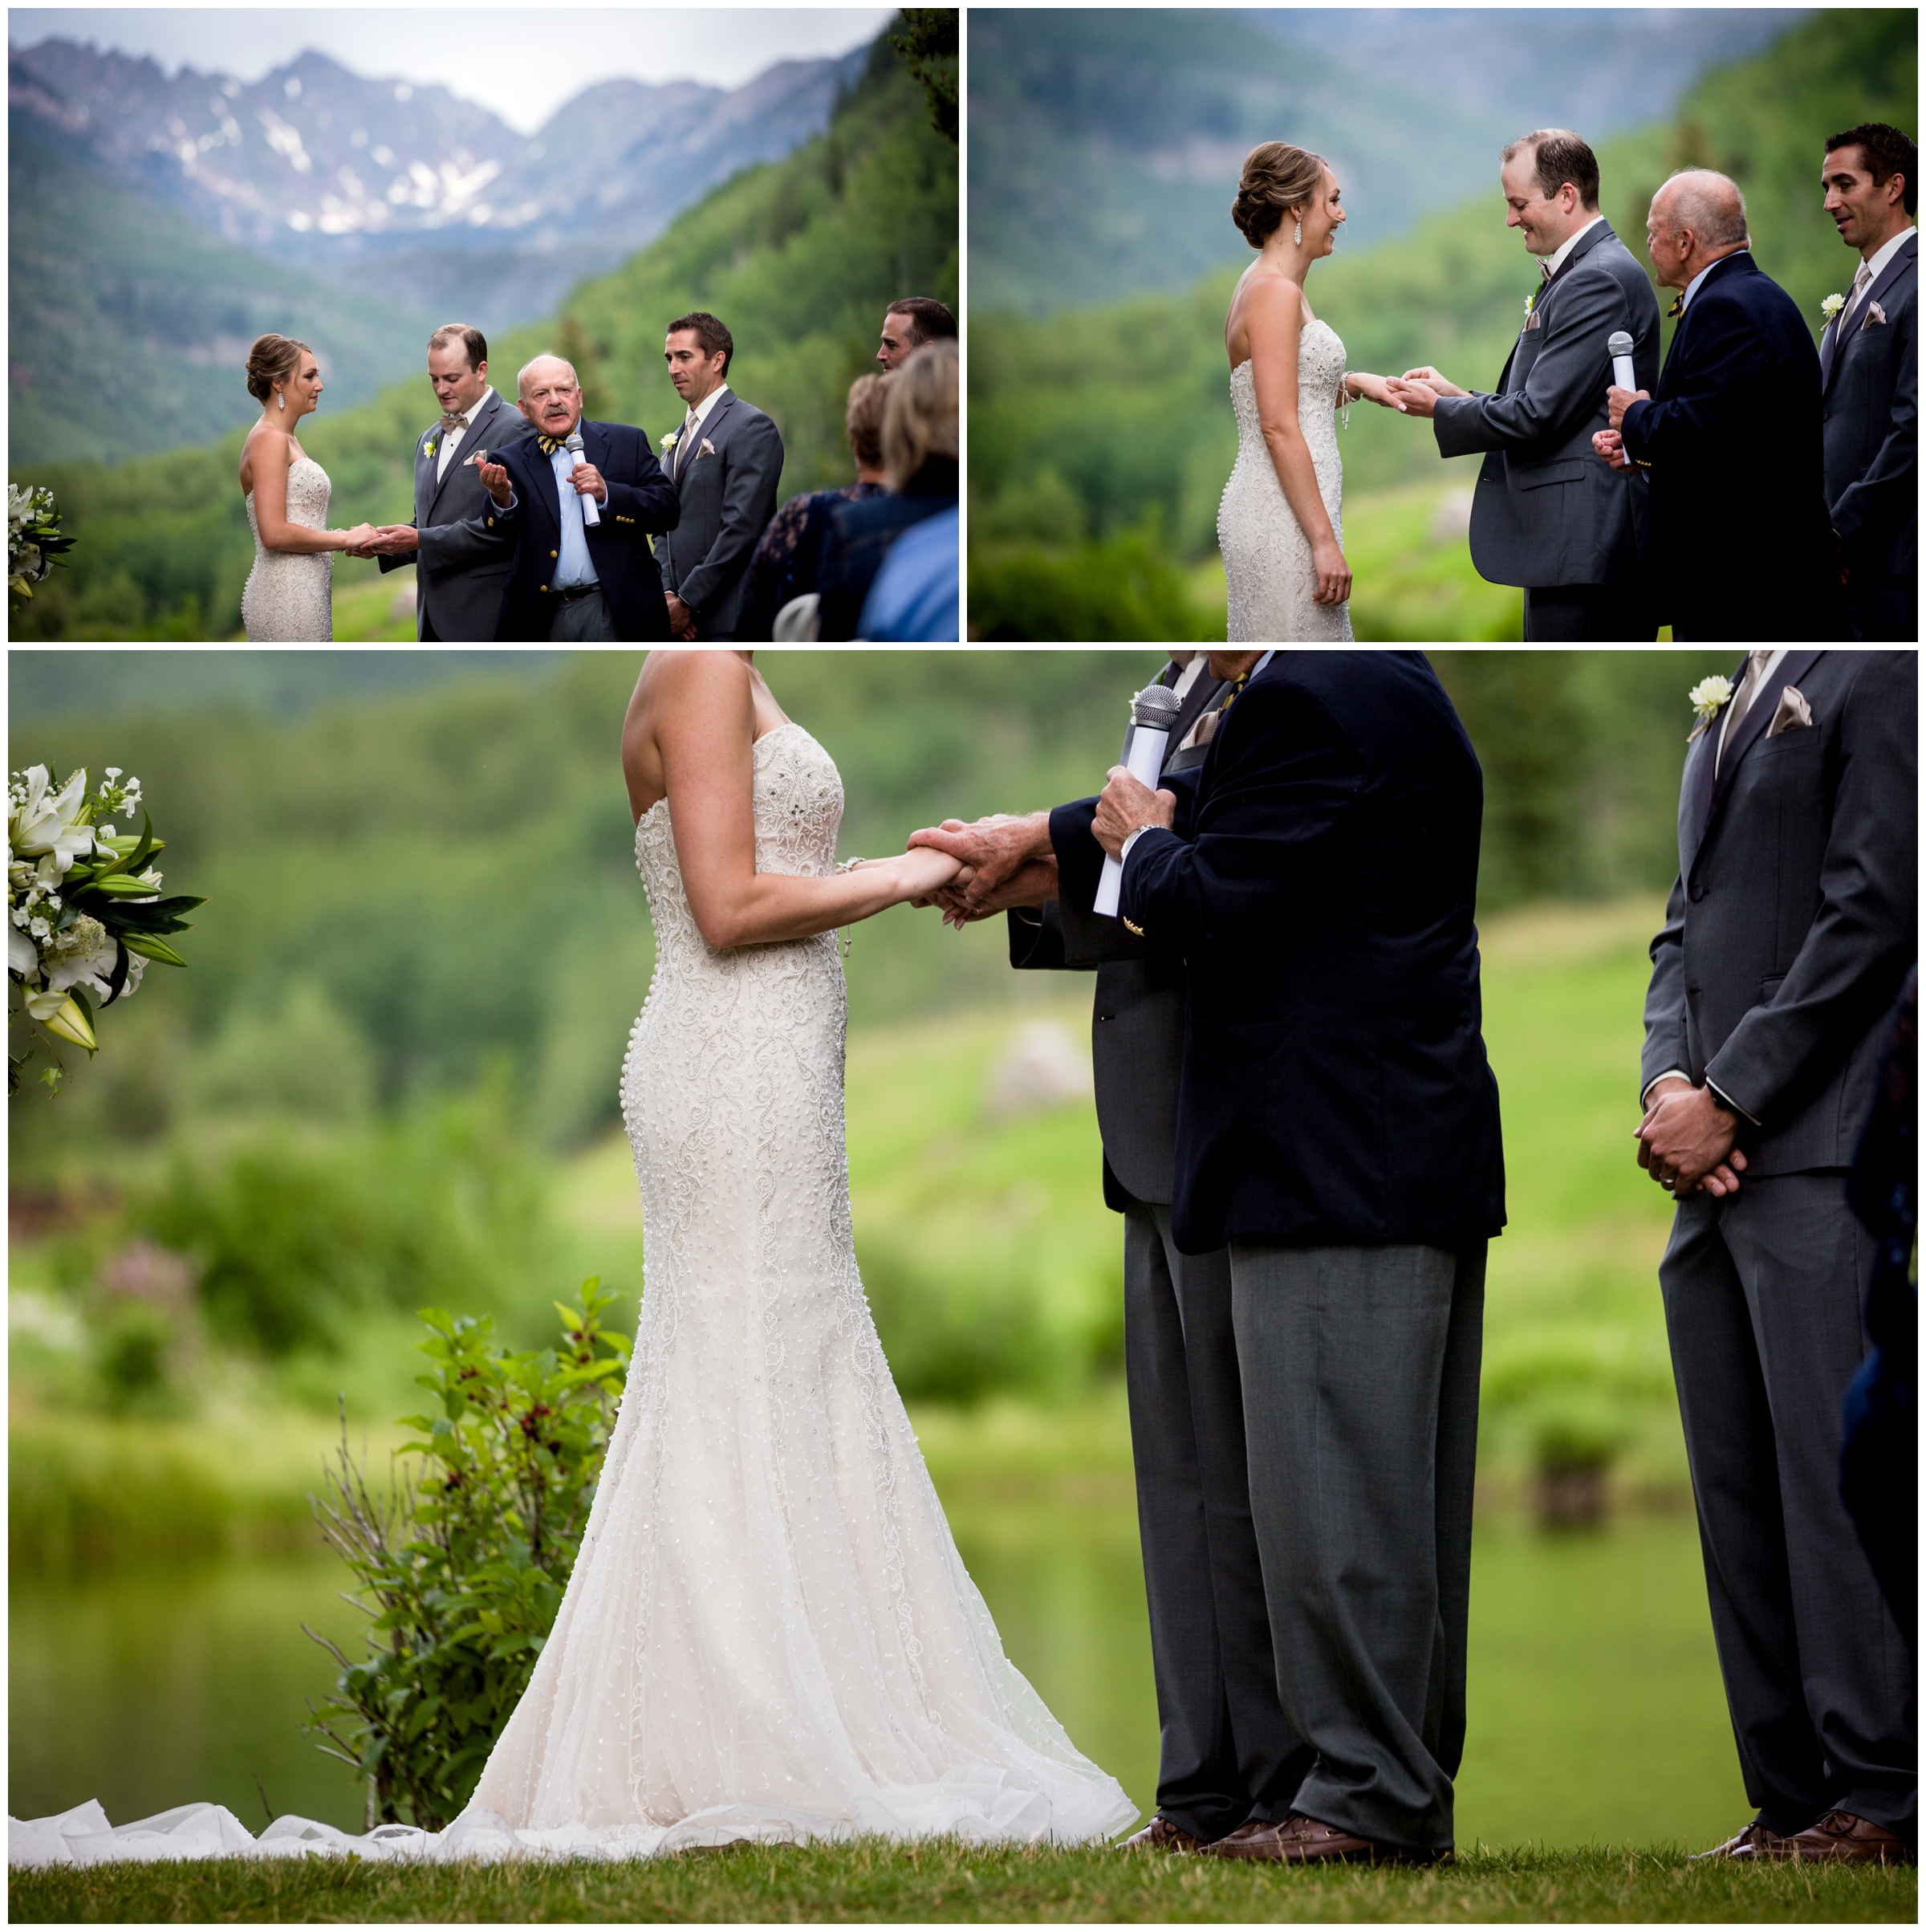 ring exchange during Vail Golf Club wedding island ceremony 